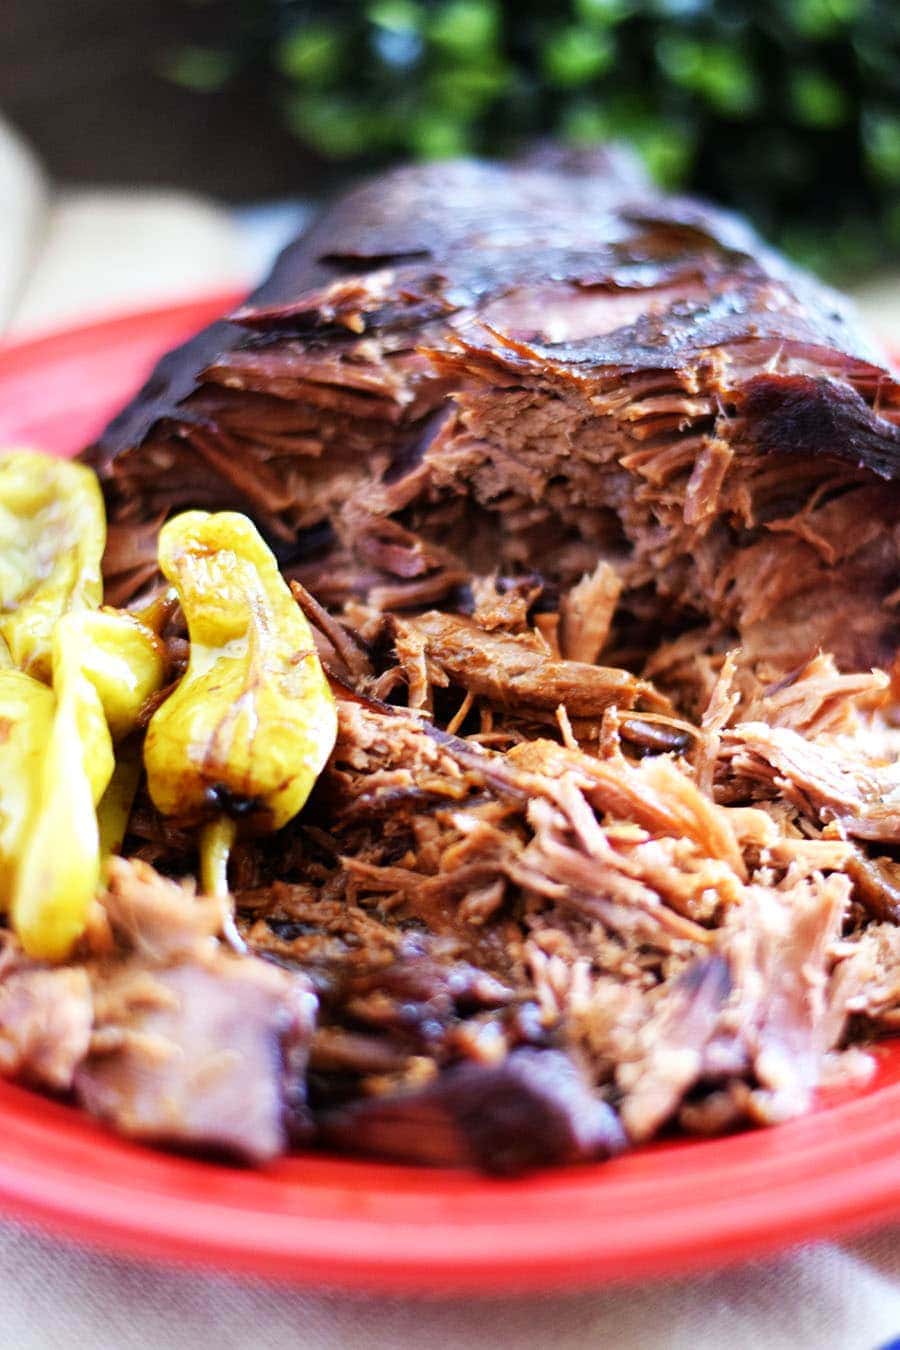 shredded beef and cooked pepperochinis from this slow cooker mississippi pot roast recipe